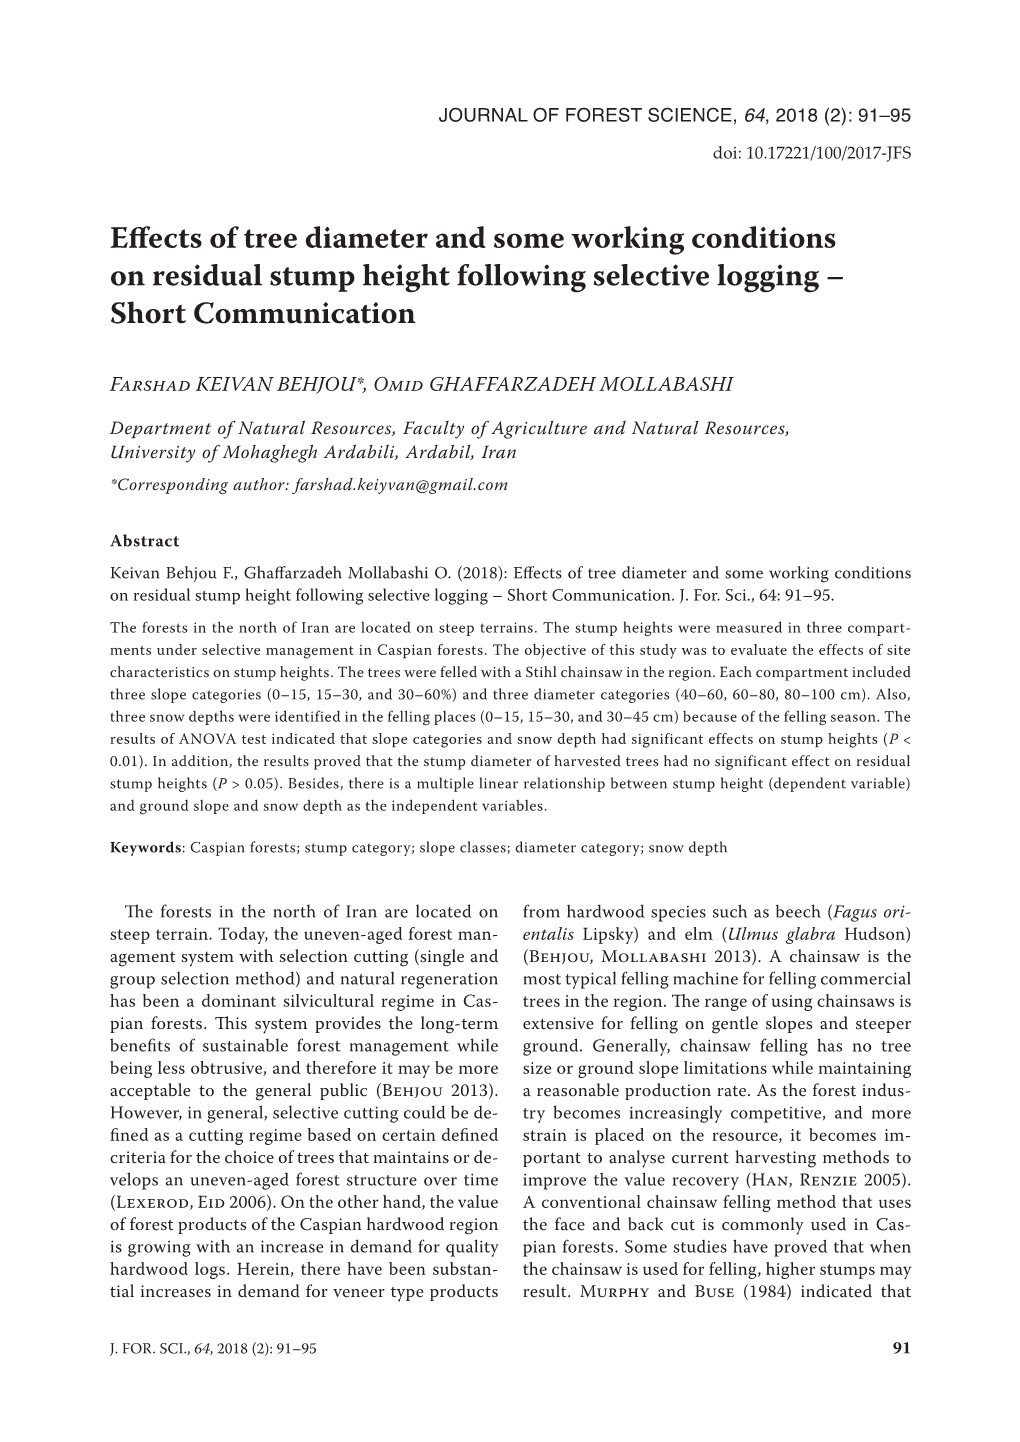 Effects of Tree Diameter and Some Working Conditions on Residual Stump Height Following Selective Logging – Short Communication